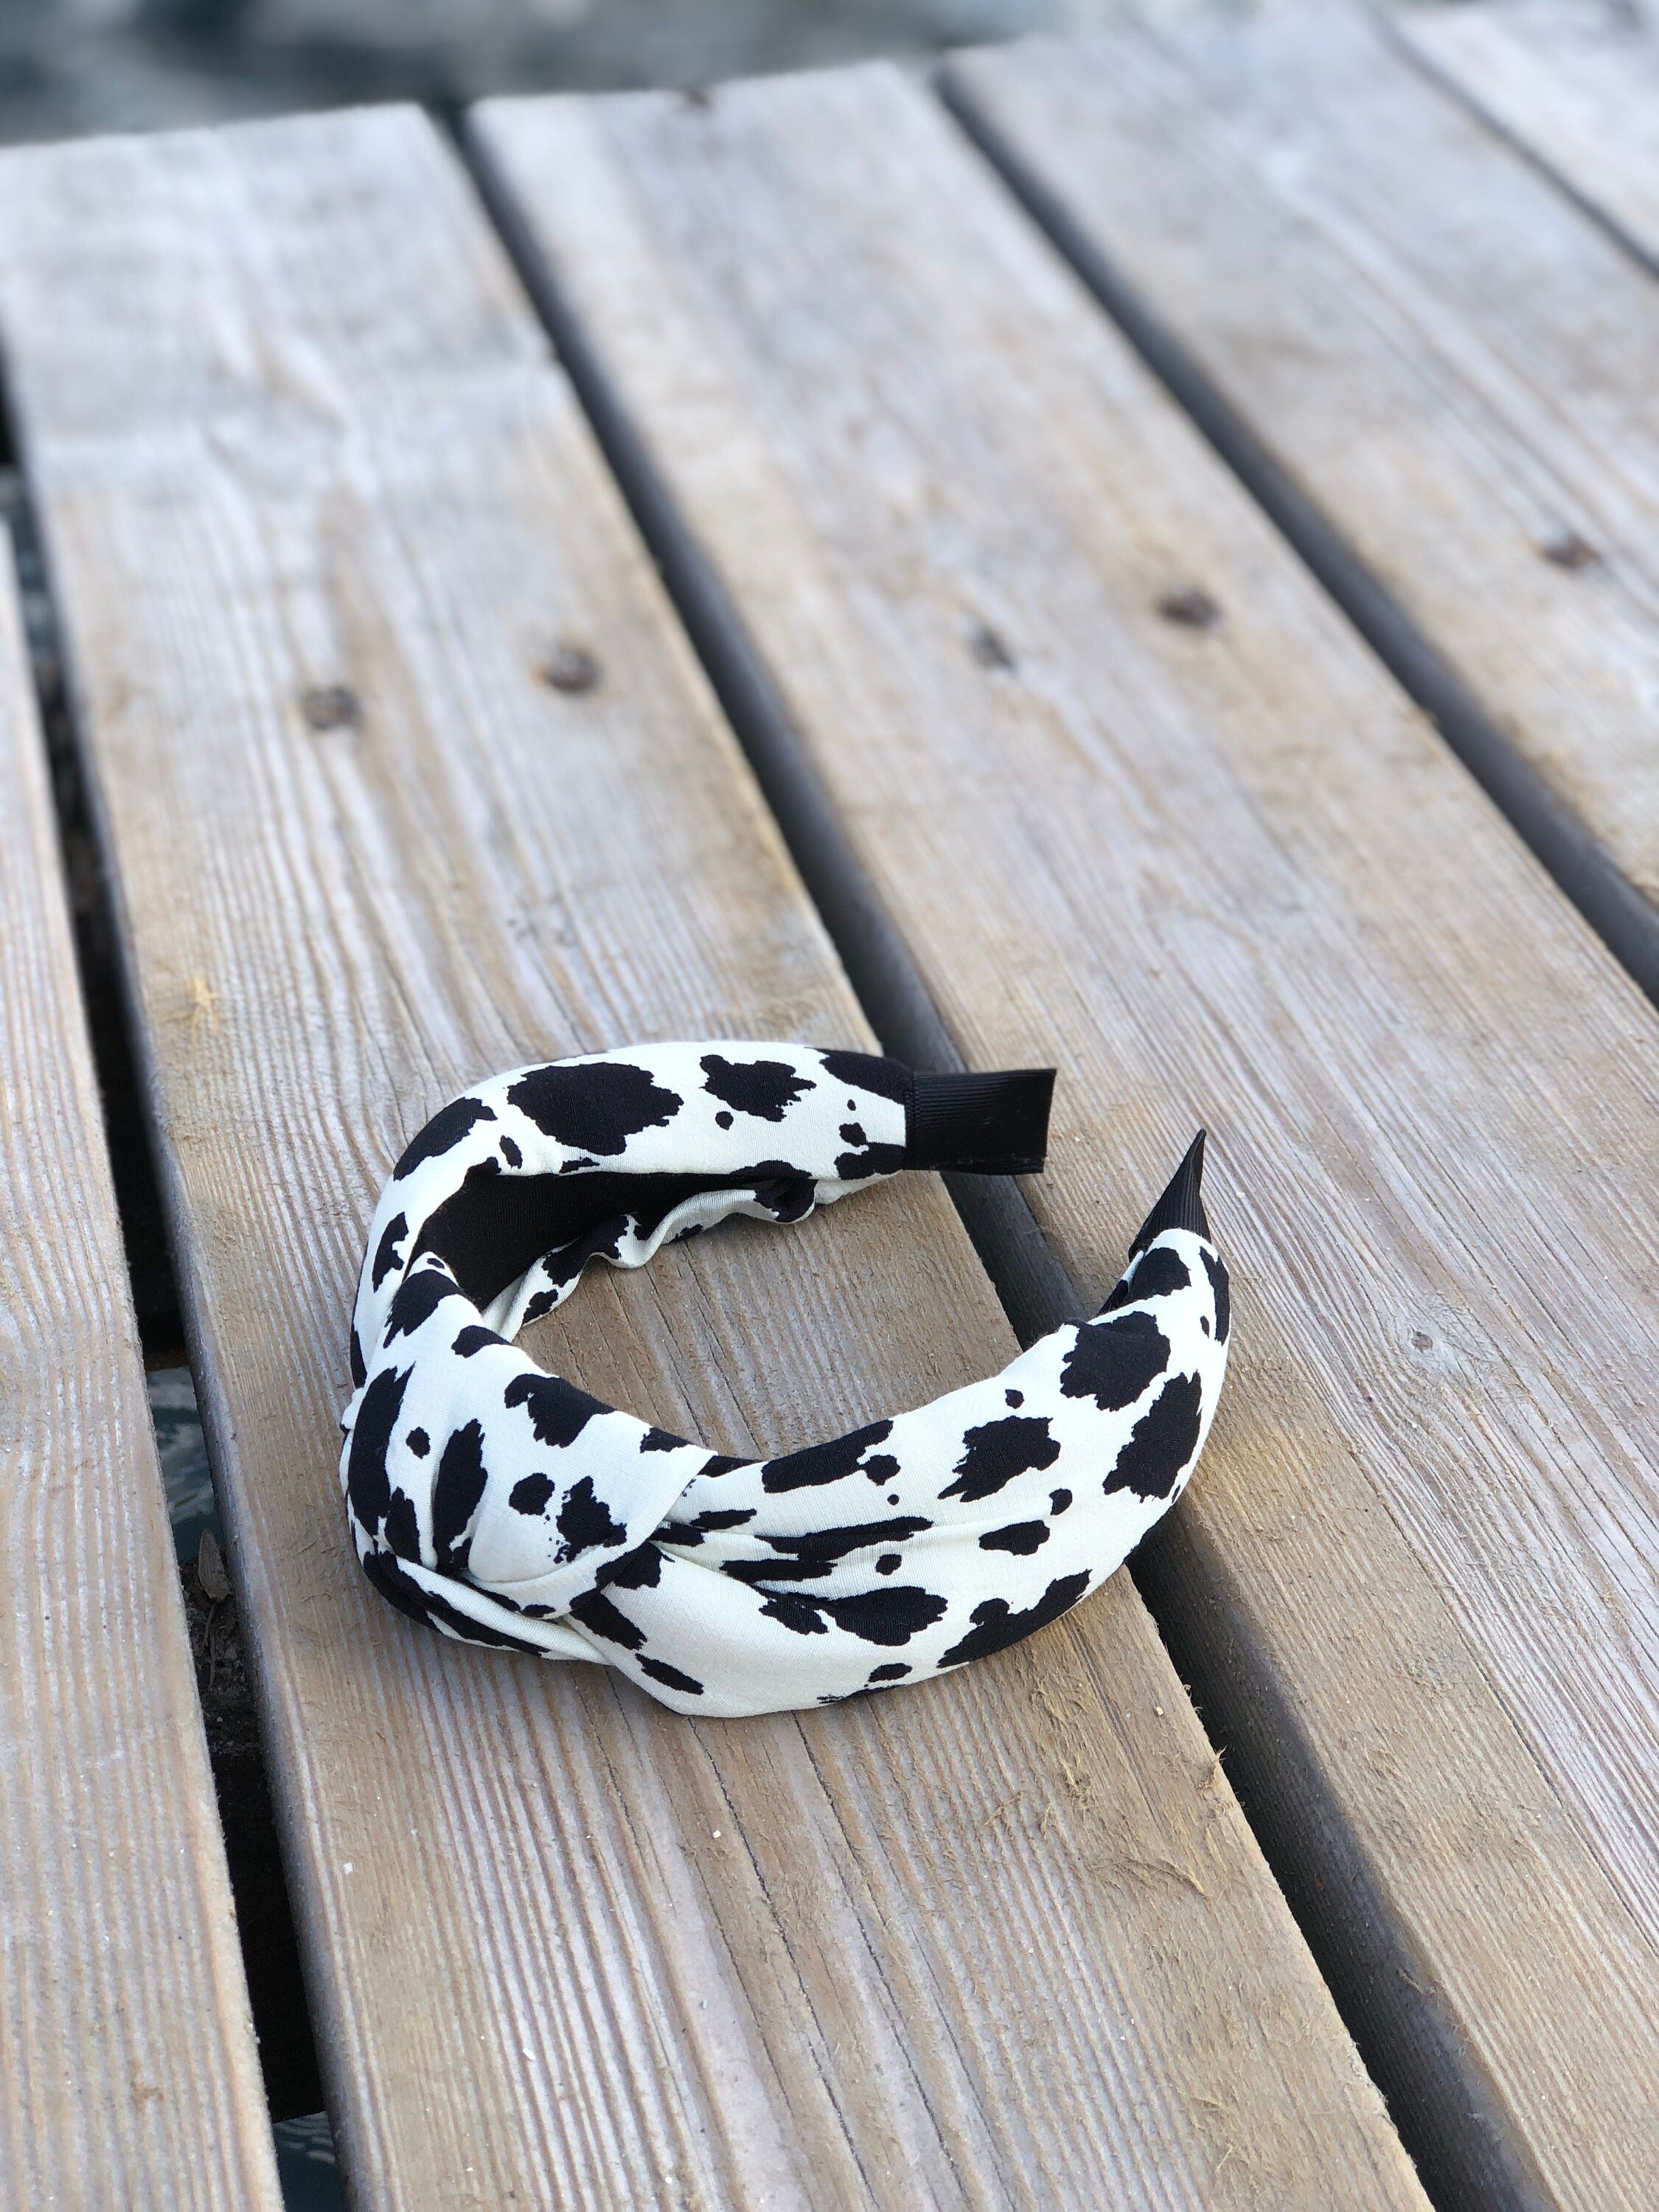 Make a statement with this unique and eye-catching white leopard headband, featuring a stylish black and white spotted print and a bow accent.